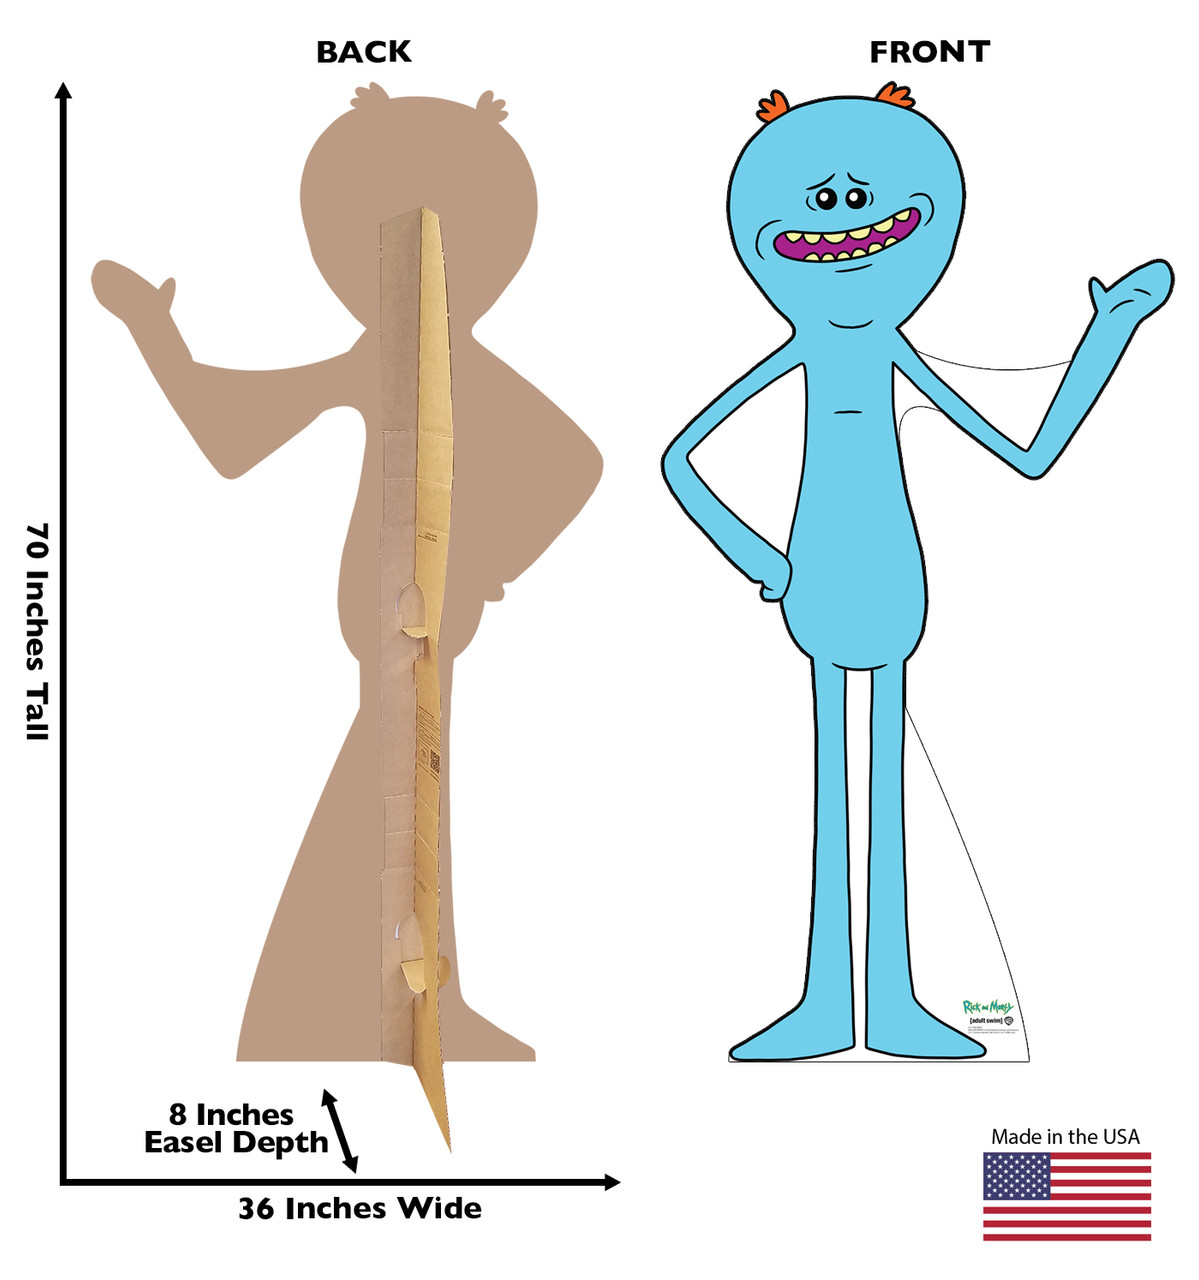 Life-size cardboard standee of Meeseeks from the Rick and Morty TV series with back and front dimensions.